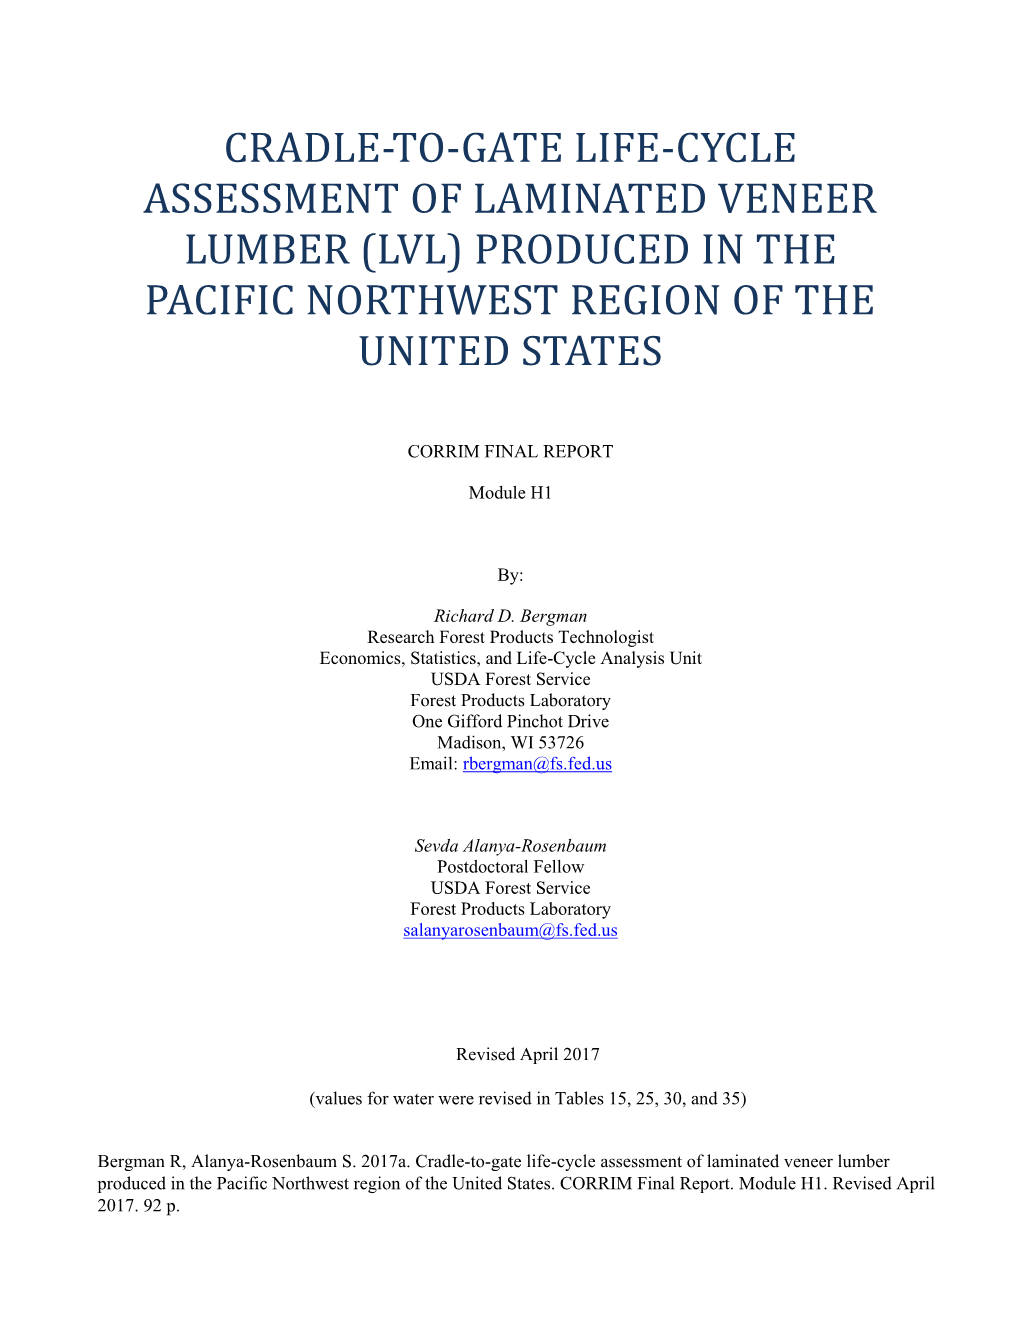 Cradle-To-Gate Life-Cycle Assessment of Laminated Veneer Lumber (Lvl) Produced in the Pacific Northwest Region of the United States